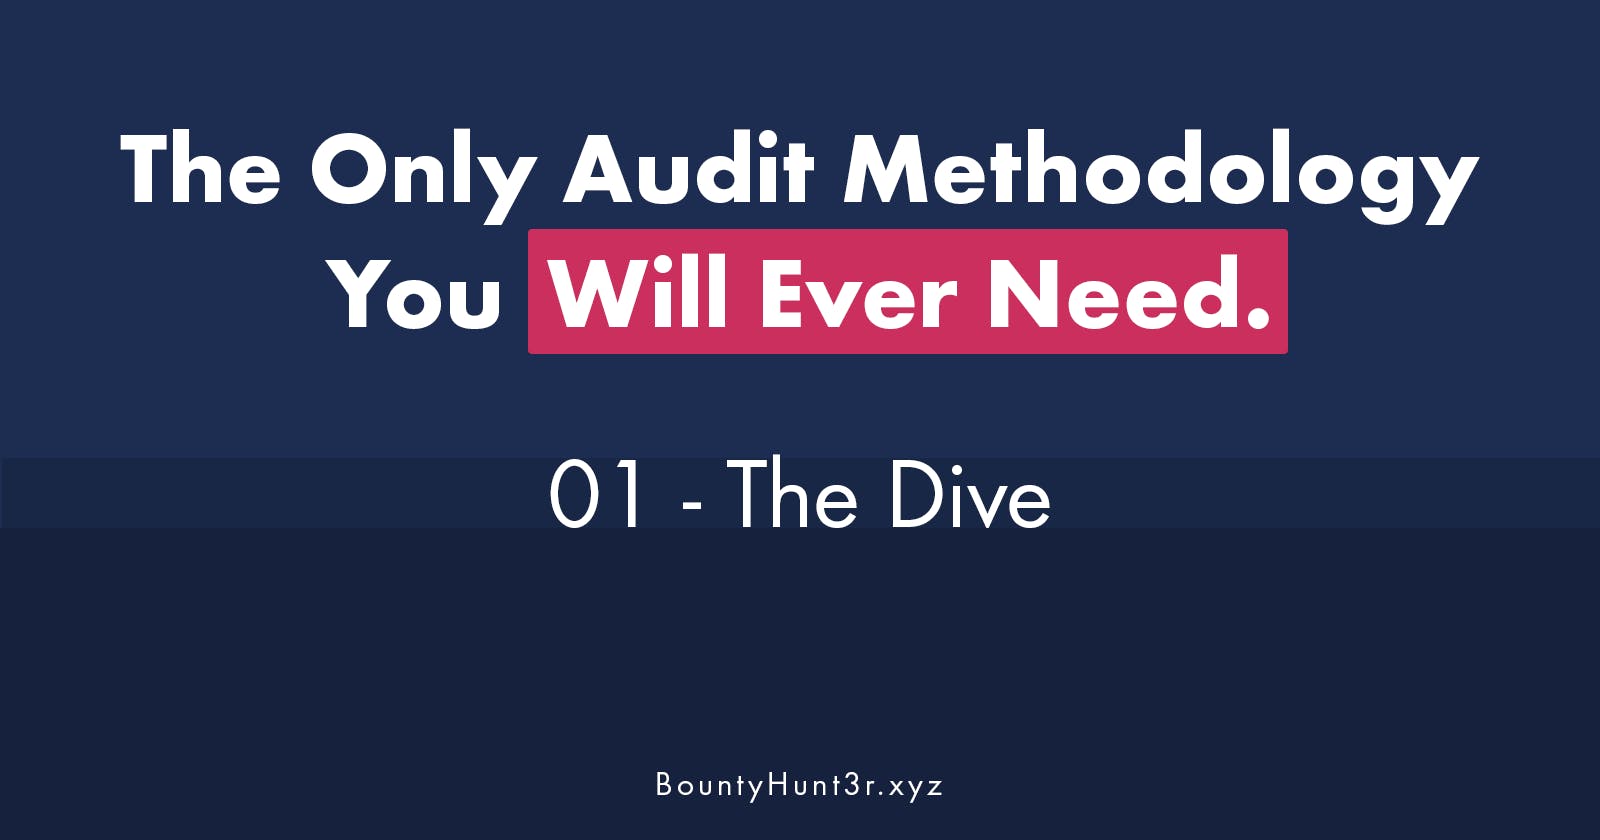 The Only Audit Methodology You Will Ever Need. 01 - The Dive